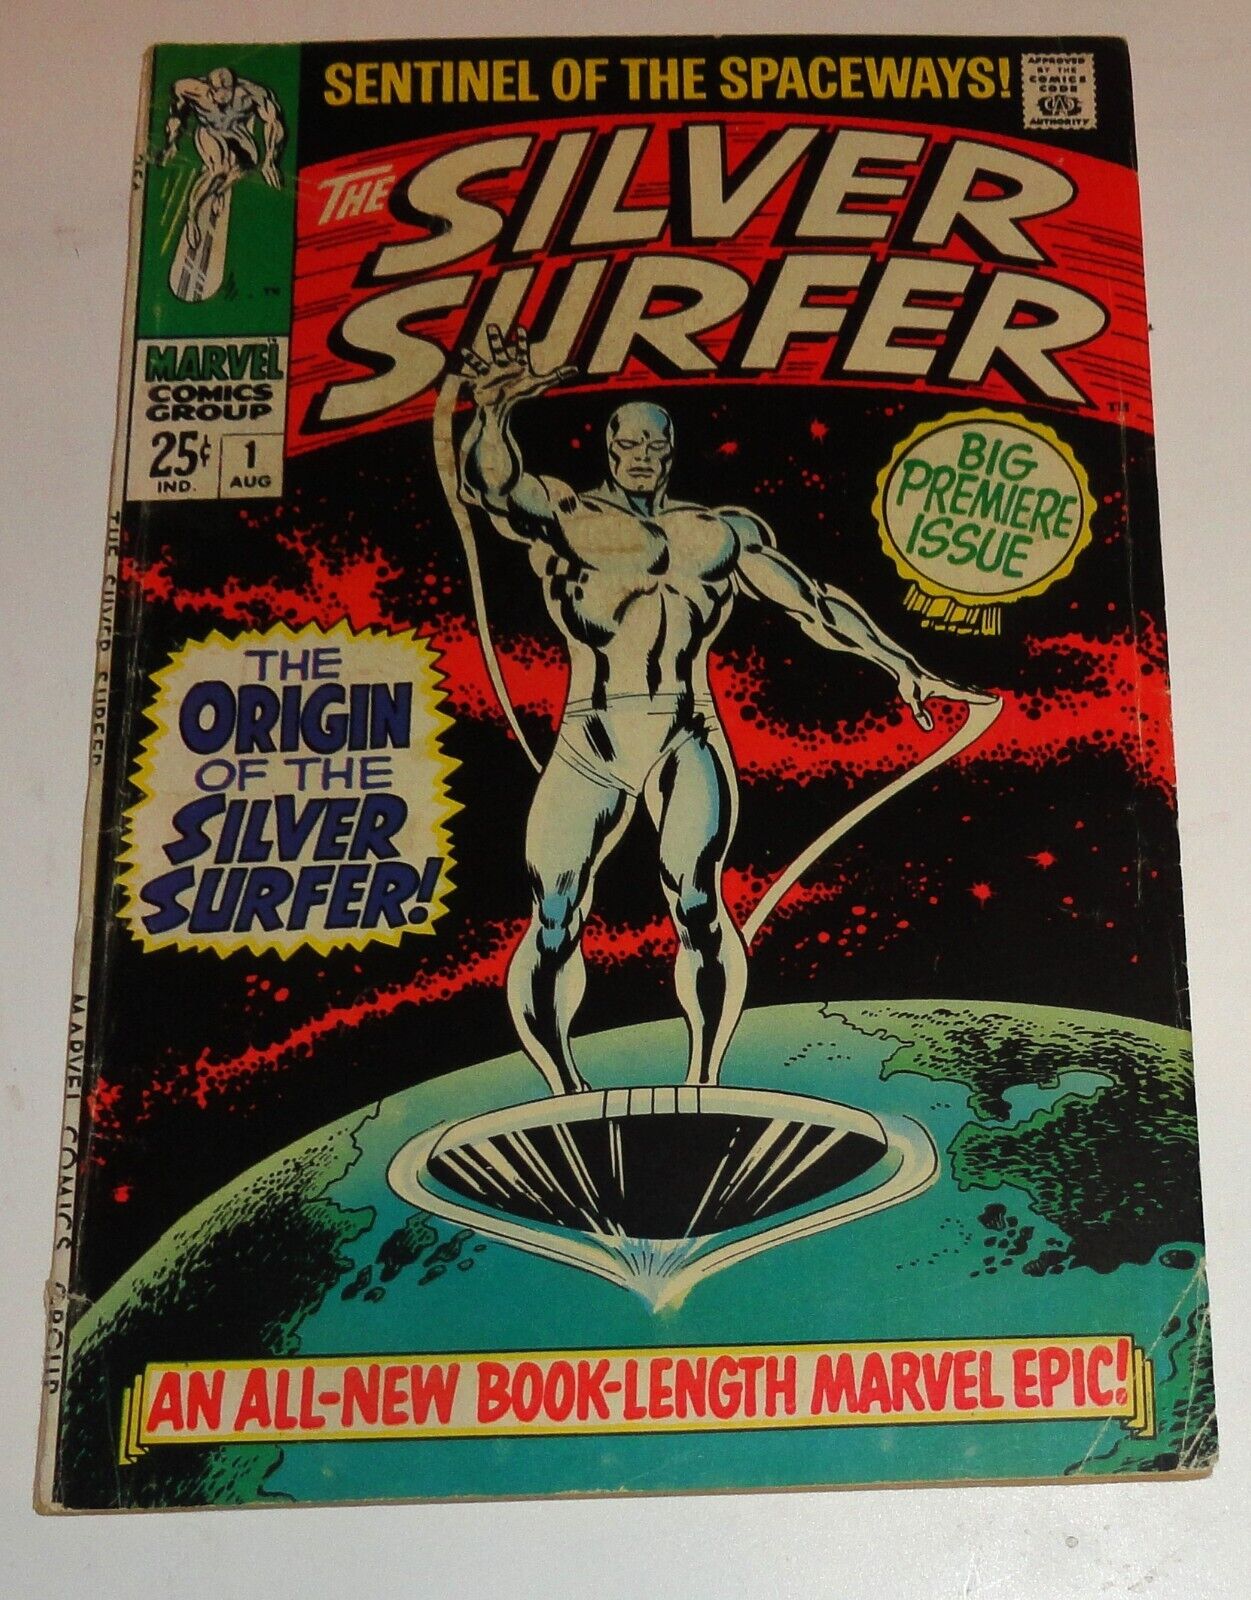 SILVER SURFER #1 VG GIANT SIZE BUSCEMA CLASSIC 1968